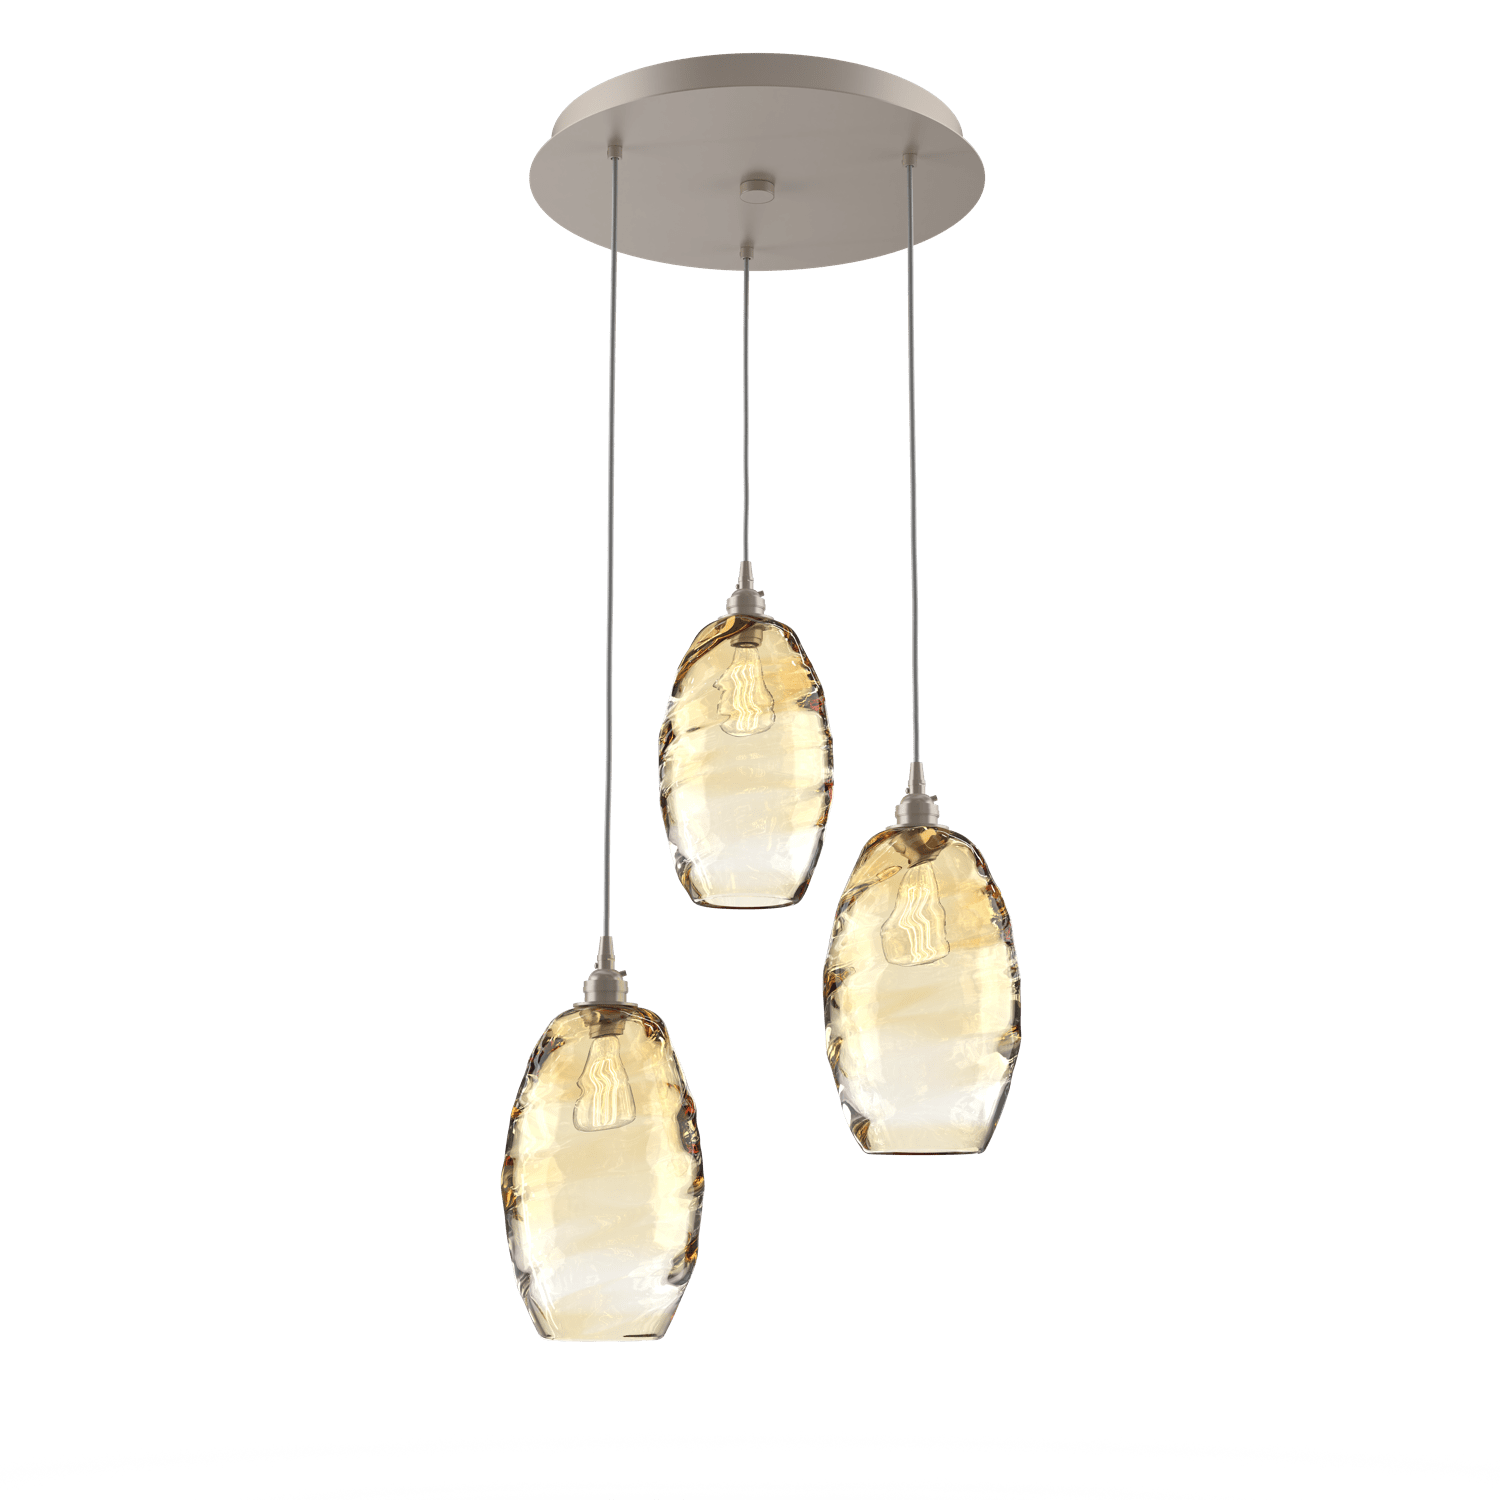 CHB0035-03-BS-OA-Hammerton-Studio-Optic-Blown-Glass-Elisse-3-light-round-pendant-chandelier-with-metallic-beige-silver-finish-and-optic-amber-blown-glass-shades-and-incandescent-lamping